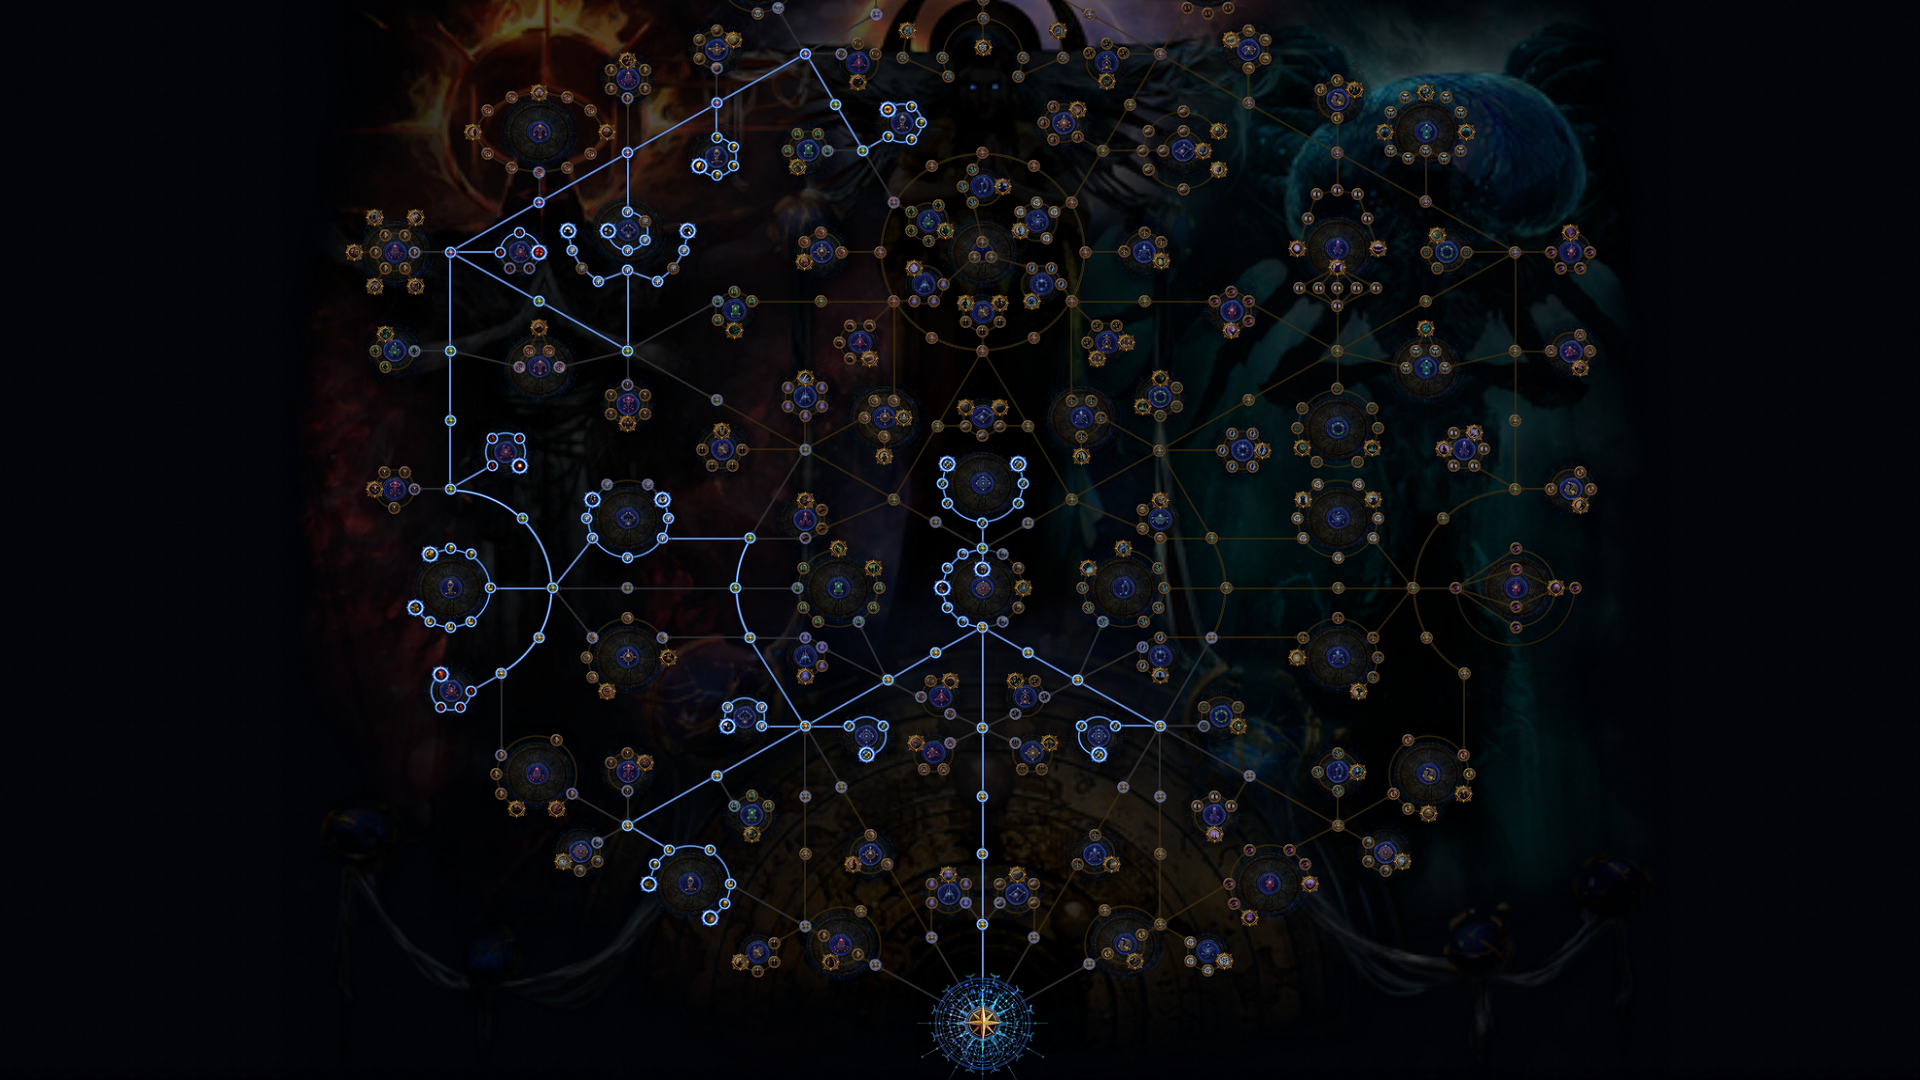 An advanced atlas tree with Blight, Beyond, and Delirium